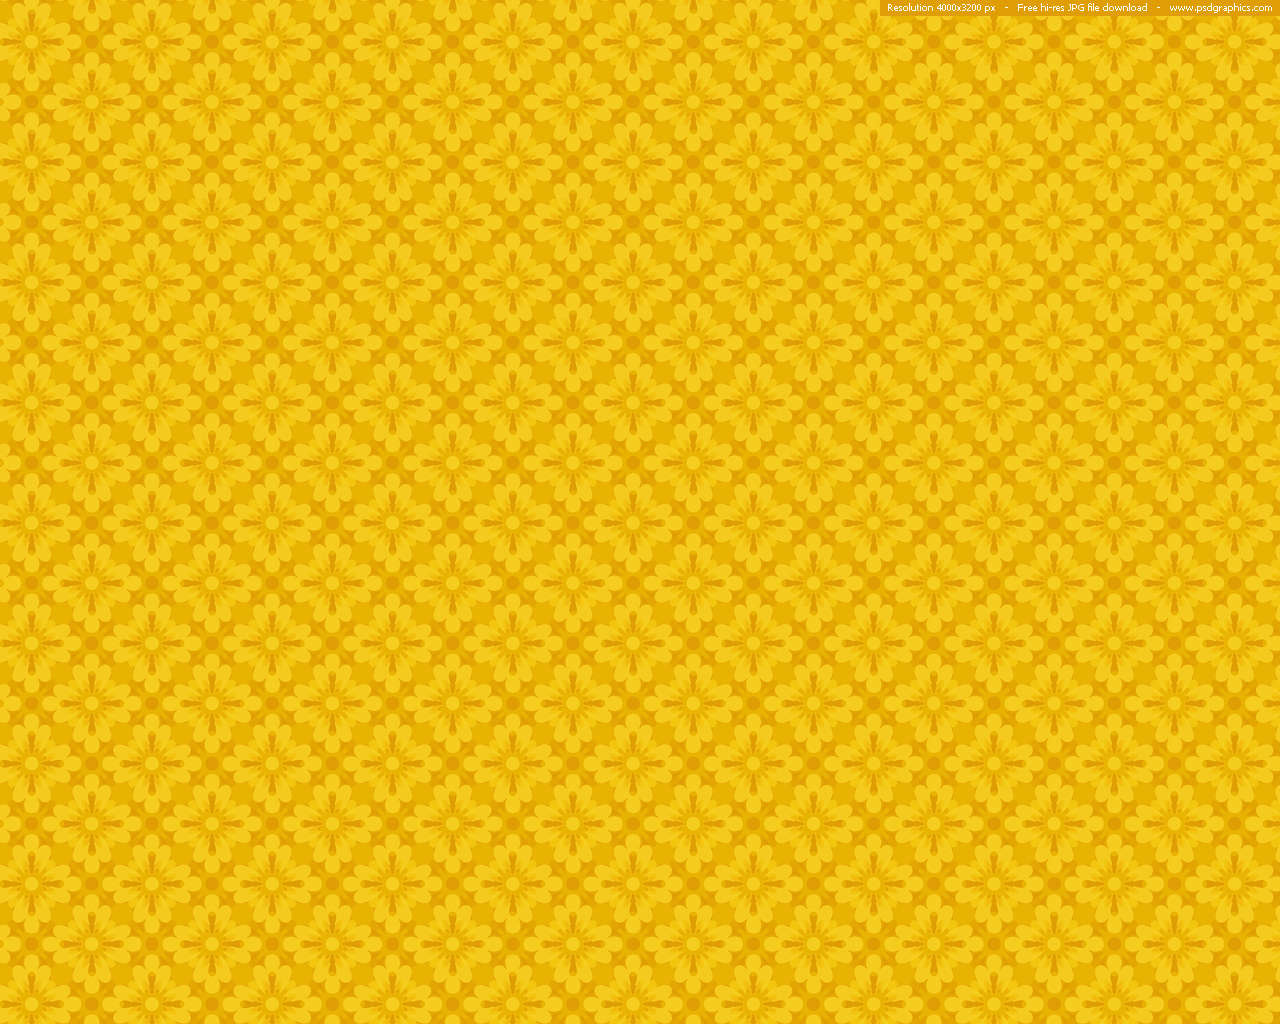 Yellow Background Images - Wallpaper Cave